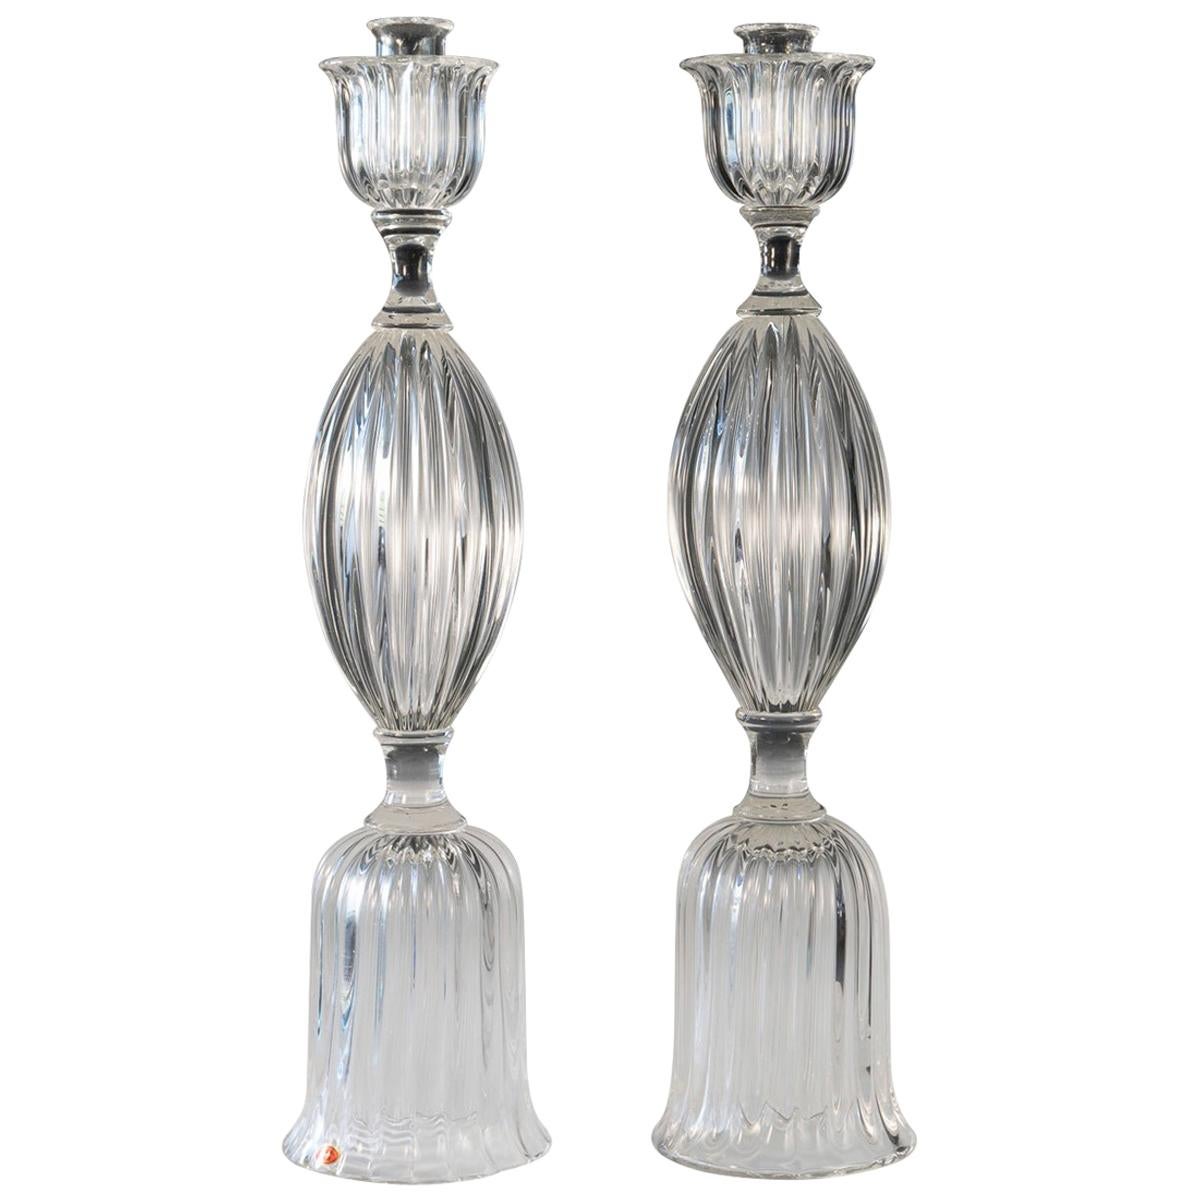 Pair of Seguso Candlesticks 3 by John Loring of Tiffany & Co. For Sale